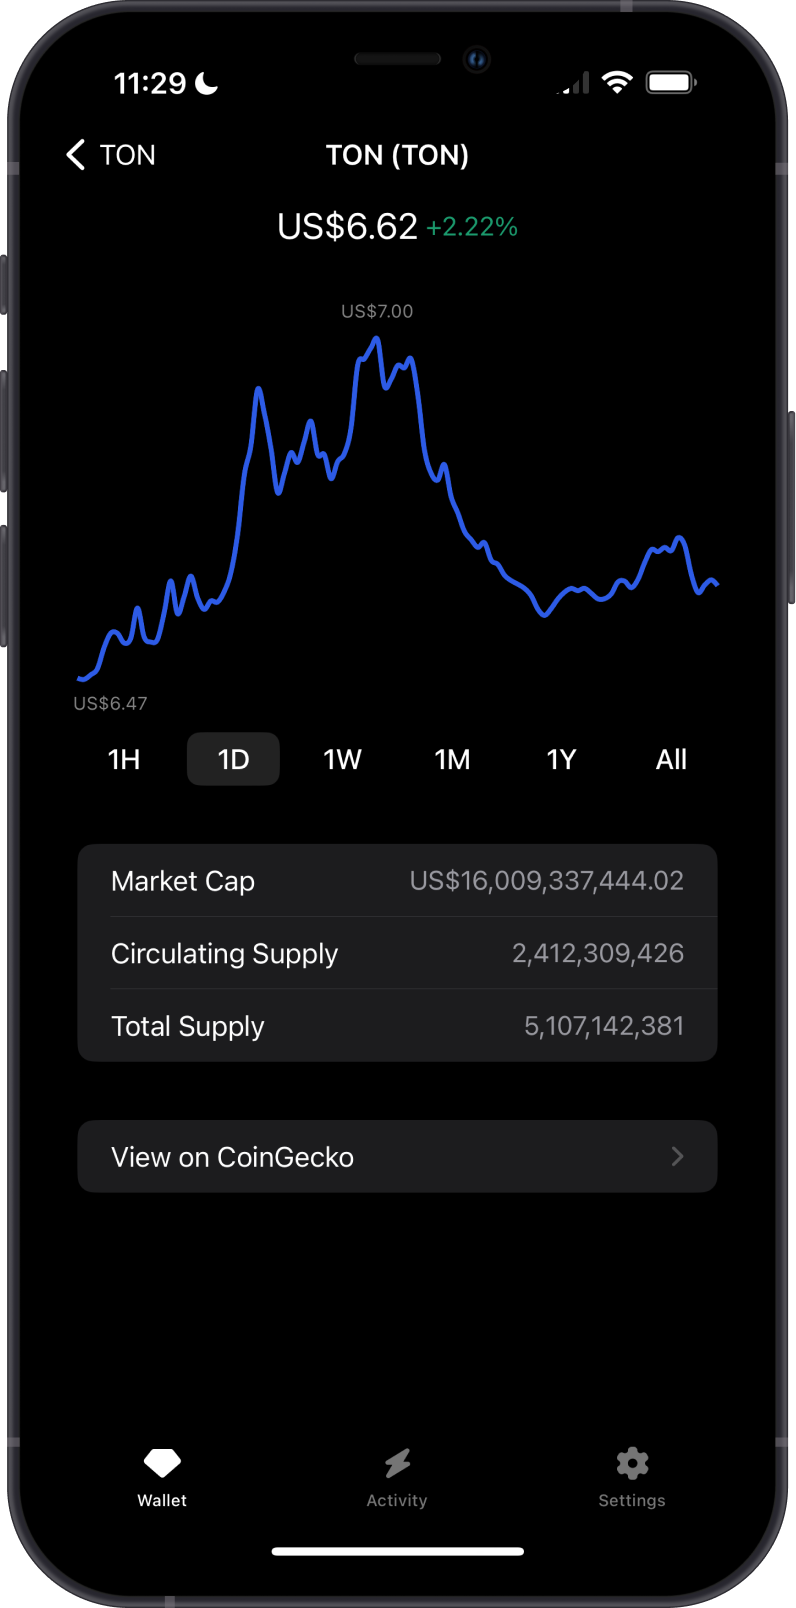 Toncoin Chart on Gem Wallet